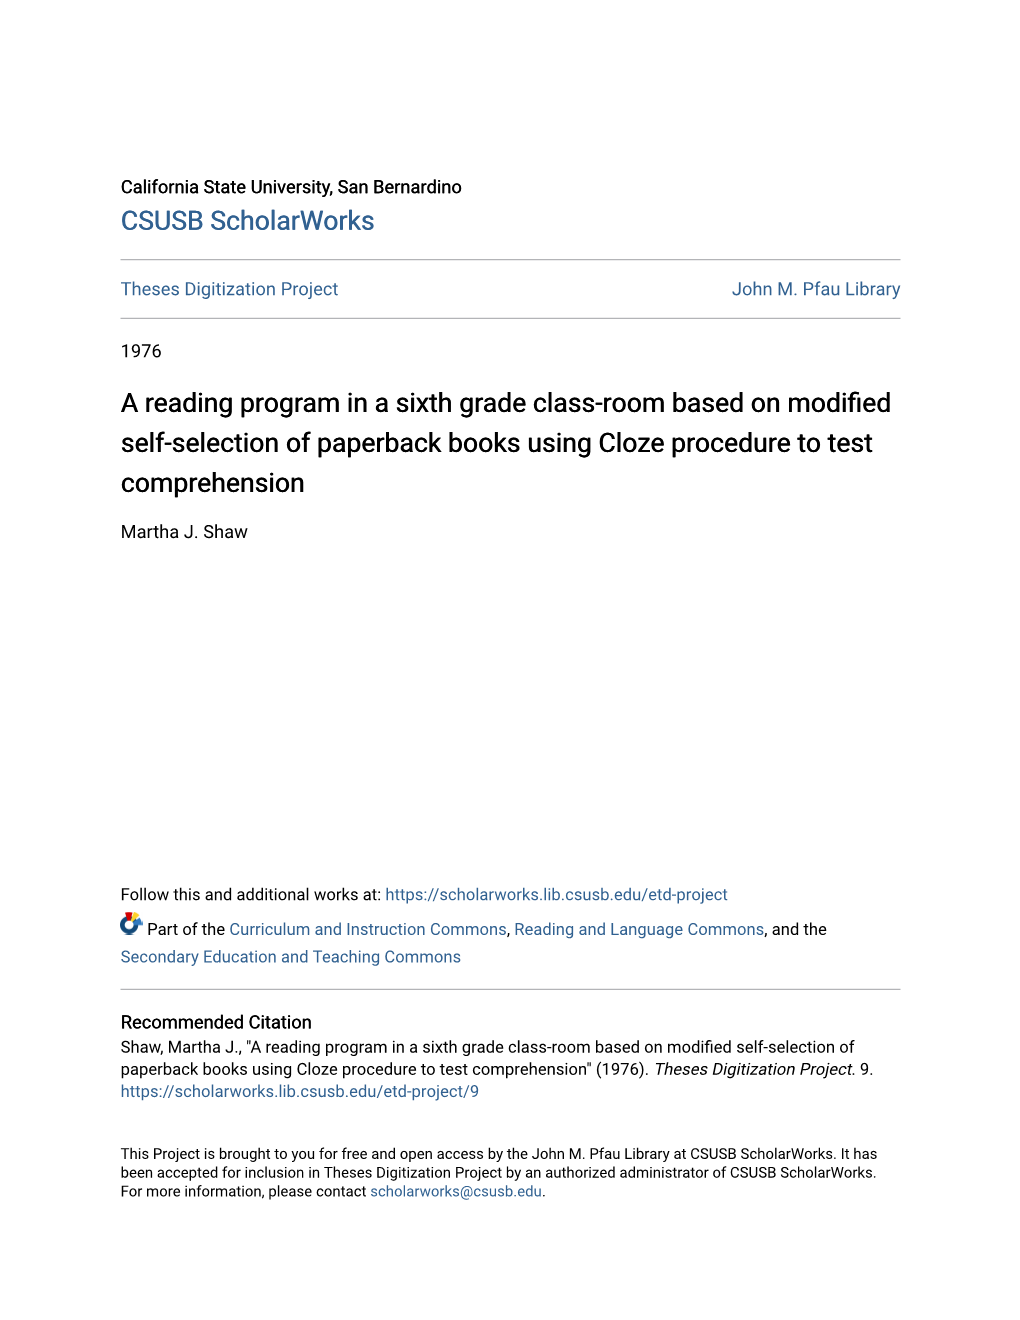 A Reading Program in a Sixth Grade Class-Room Based on Modified Self-Selection of Paperback Books Using Cloze Procedure to Test Comprehension